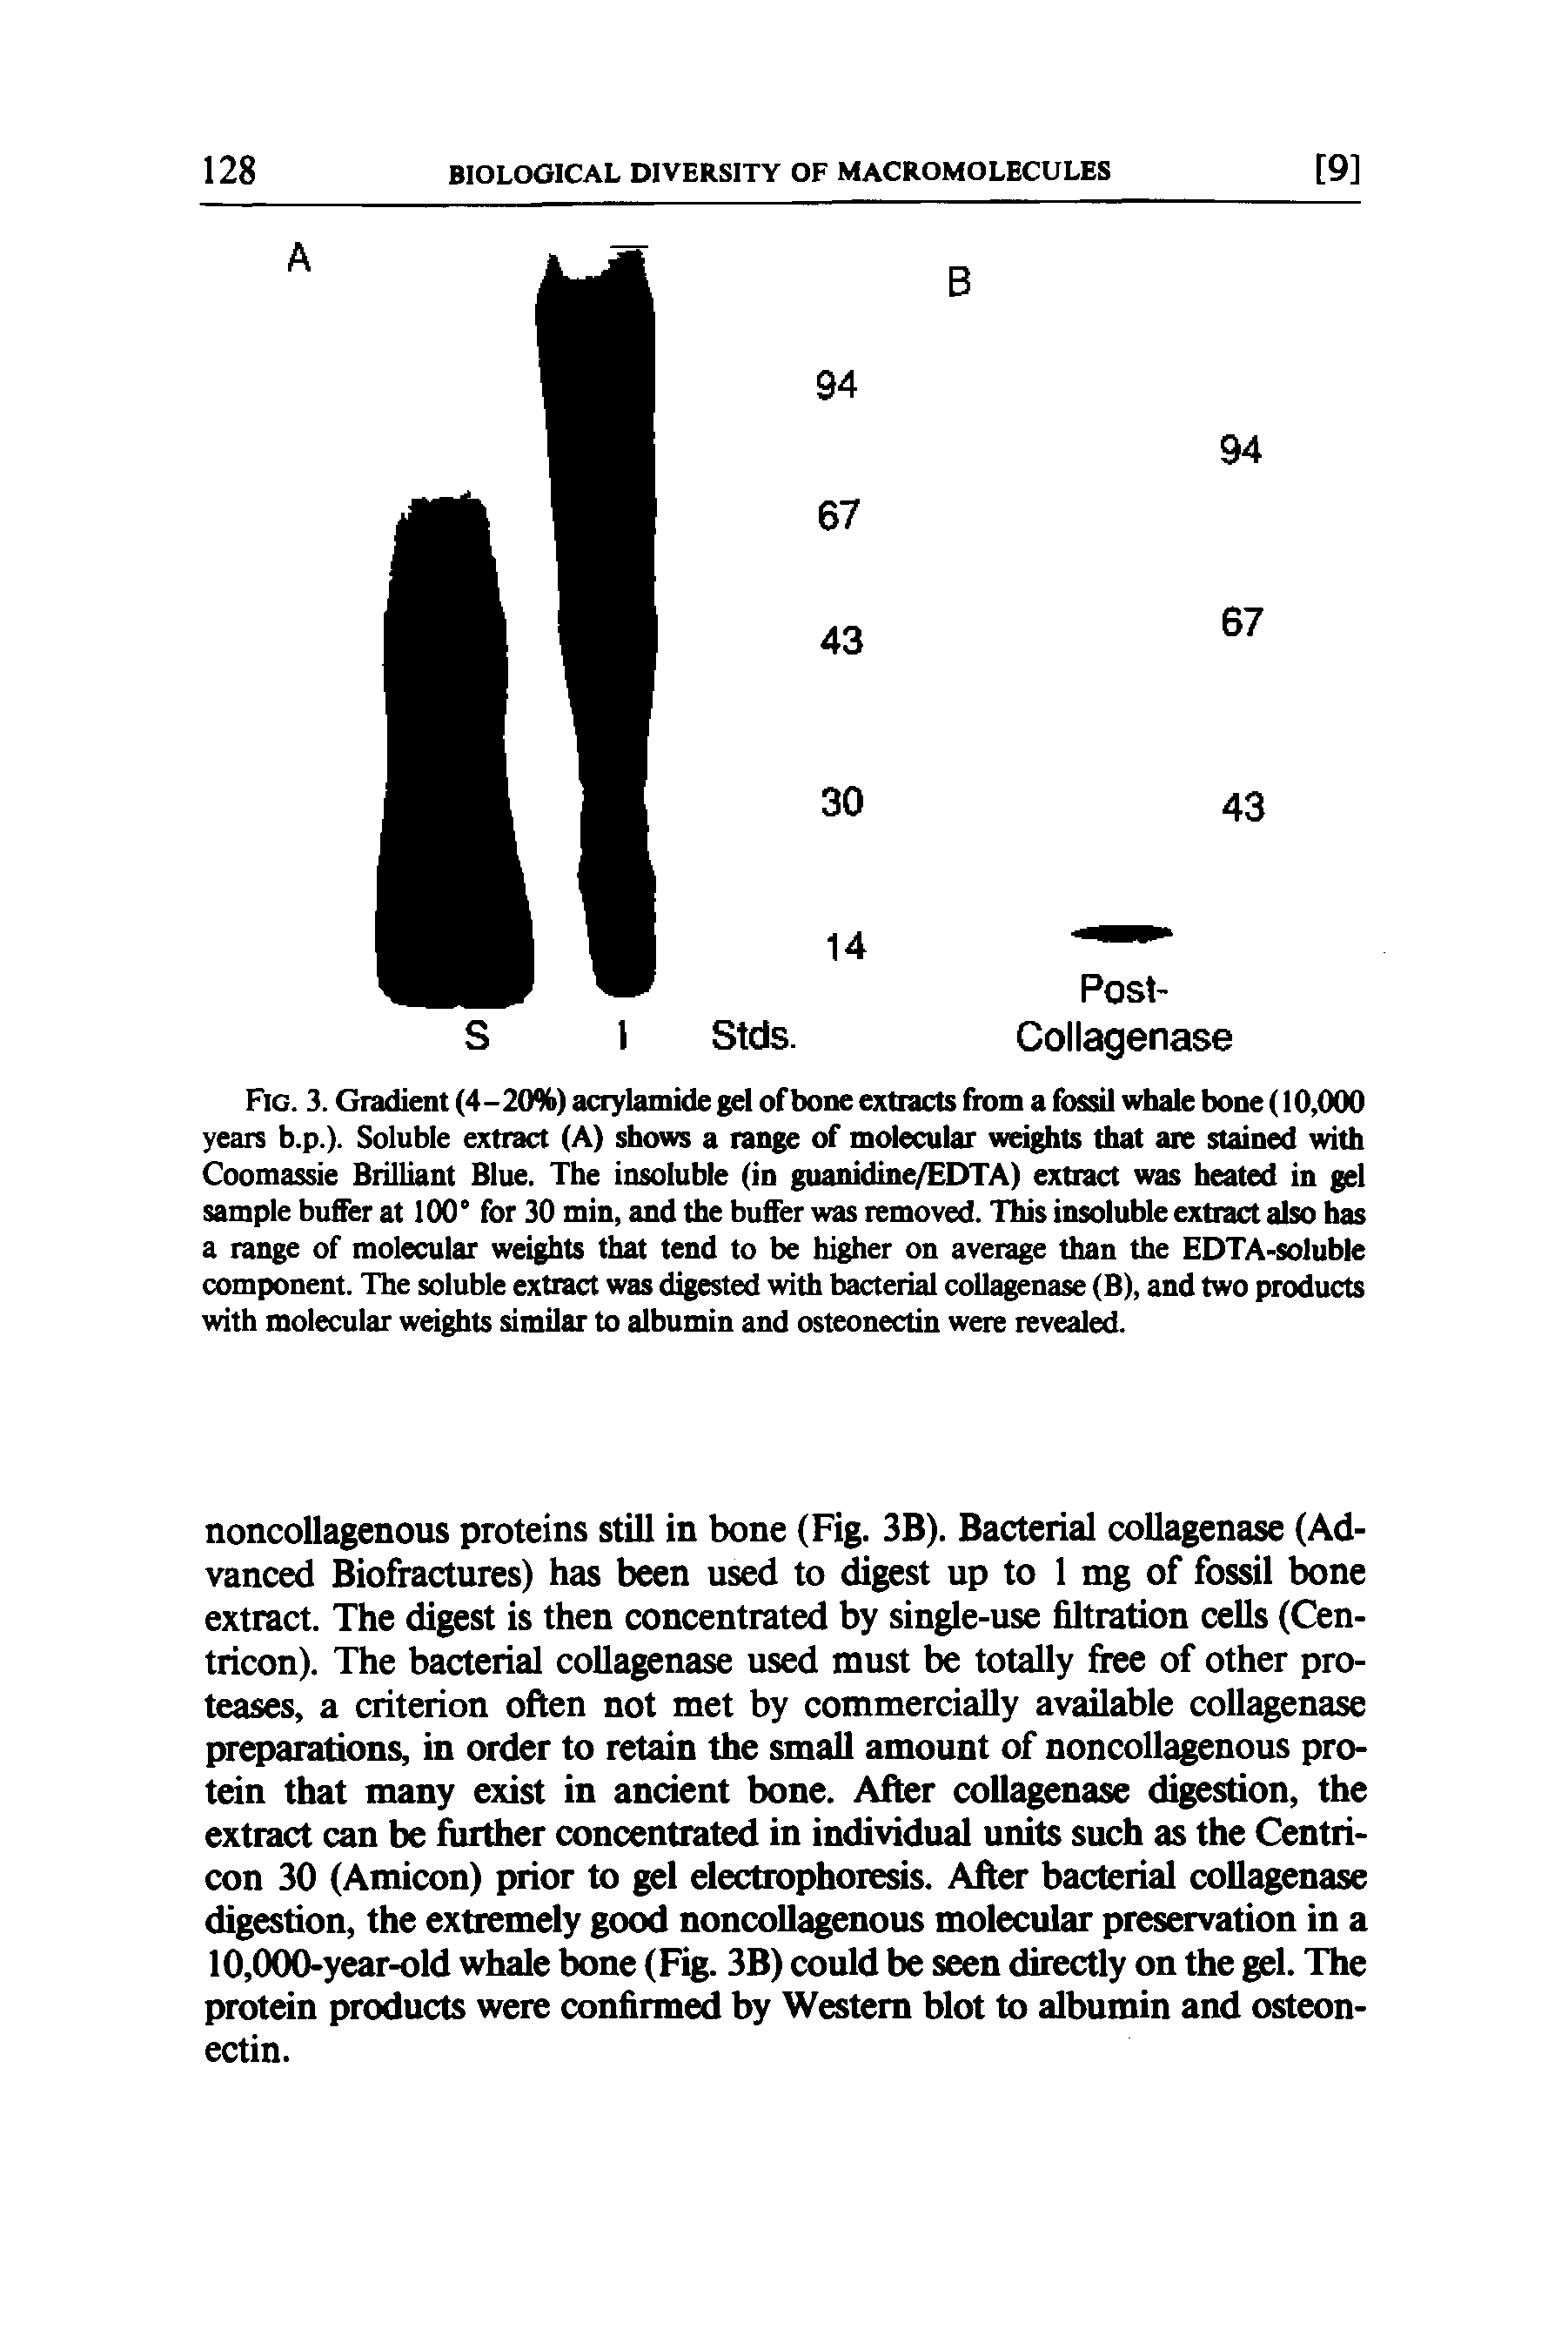 Fig. 3. Gradient (4-20%) acrylamide gel of bone extracts from a fossil whale bone (10,000 years b.p.). Soluble extract (A) shows a range of molecular weights that are stained with Coomassie Brilliant Blue. The insoluble (in guanidine/EDTA) extract was heated in gel sample buffer at 100° for 30 min, and the buffer was removed. This insoluble extract also has a range of molecular weights that tend to be higher on average than the EDTA-soluble component. The soluble extract was digested with bacterial collagenase (B), and two products with molecular weights similar to albumin and osteonectin were revealed.